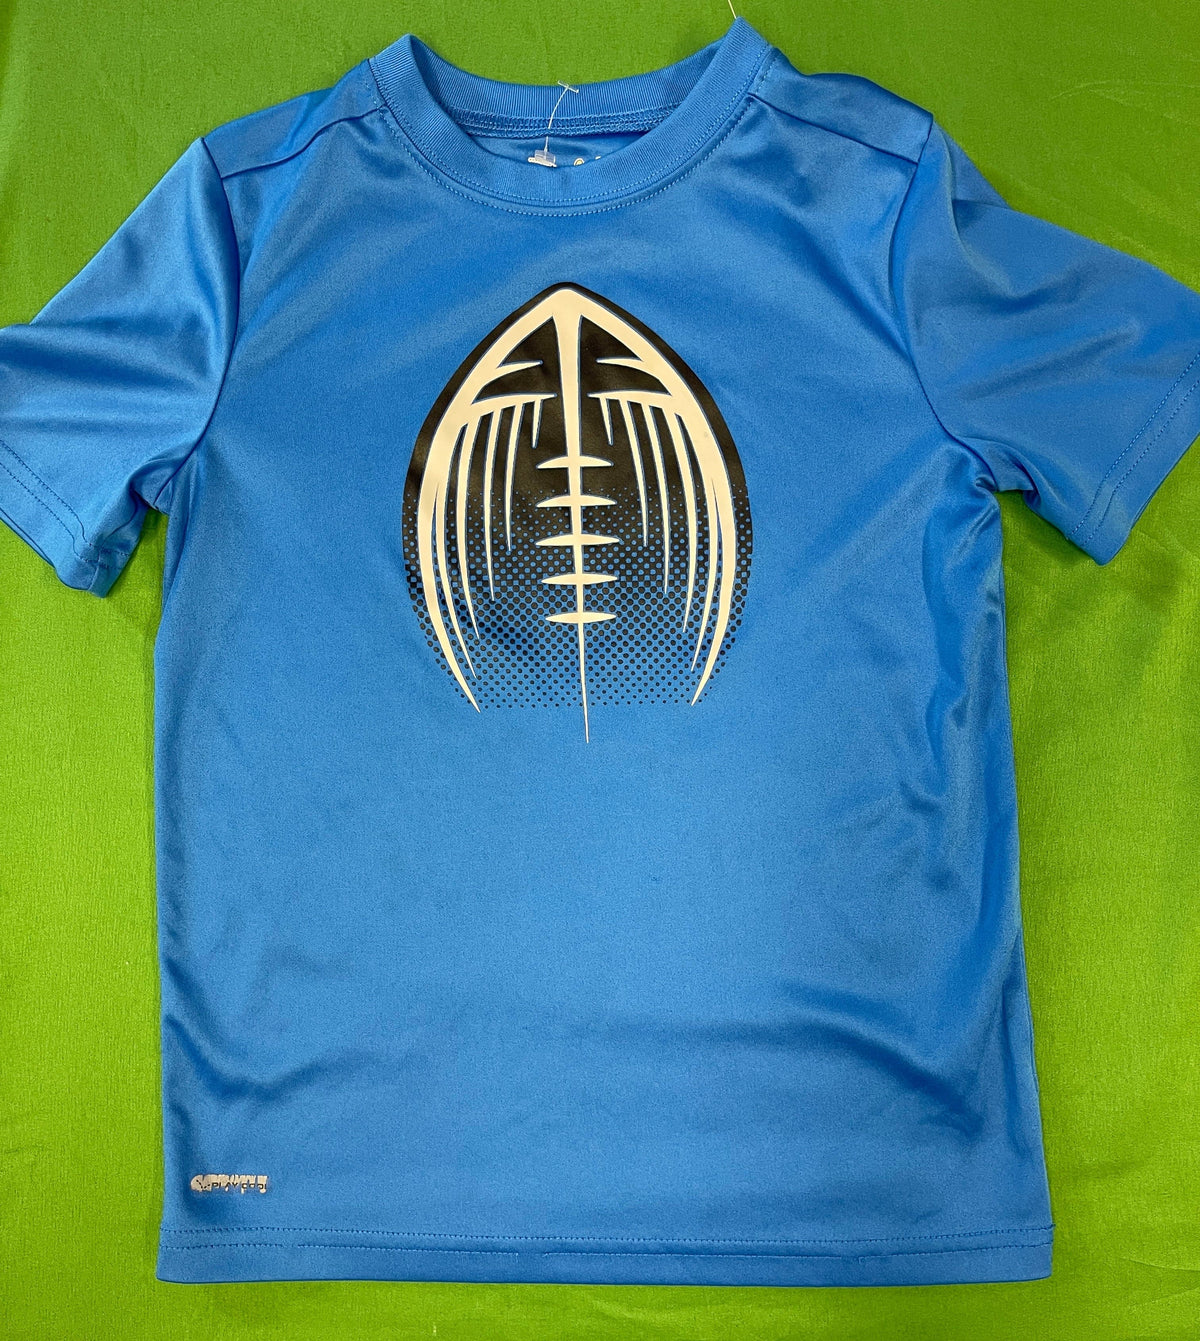 American Football Blue T-Shirt Youth X-Small/Small 5-6